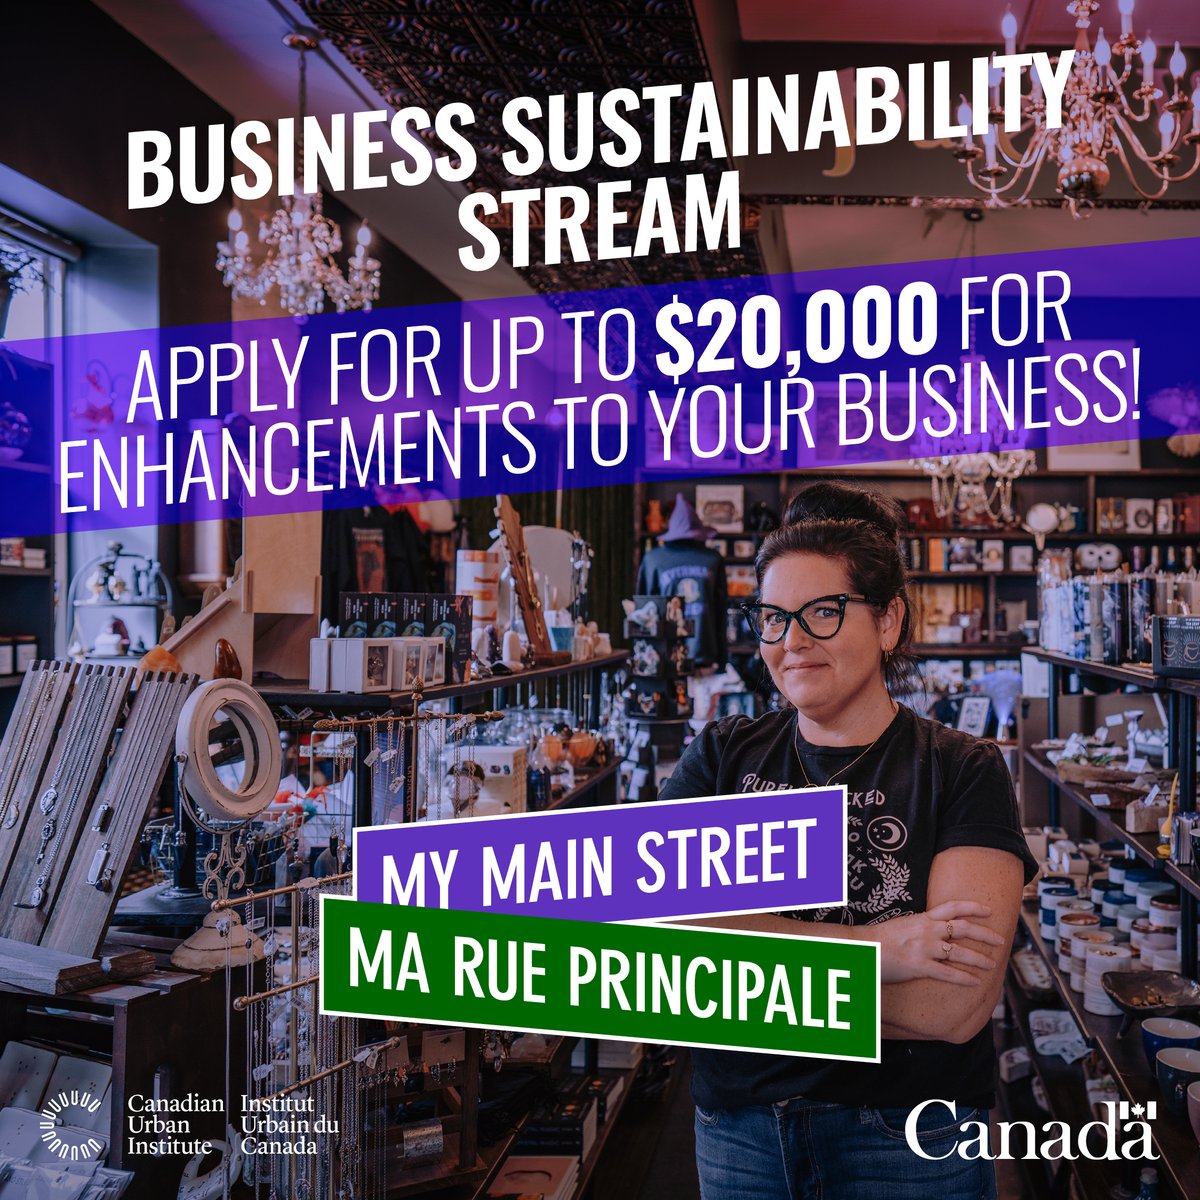 Applications are still open for @my_main_st’s Community Activator and Business Sustainability streams! With a @FedDevOntario investment of $15 million, @CANURB is supporting main street businesses & communities across #southON. Apply today at mymainstreet.ca!